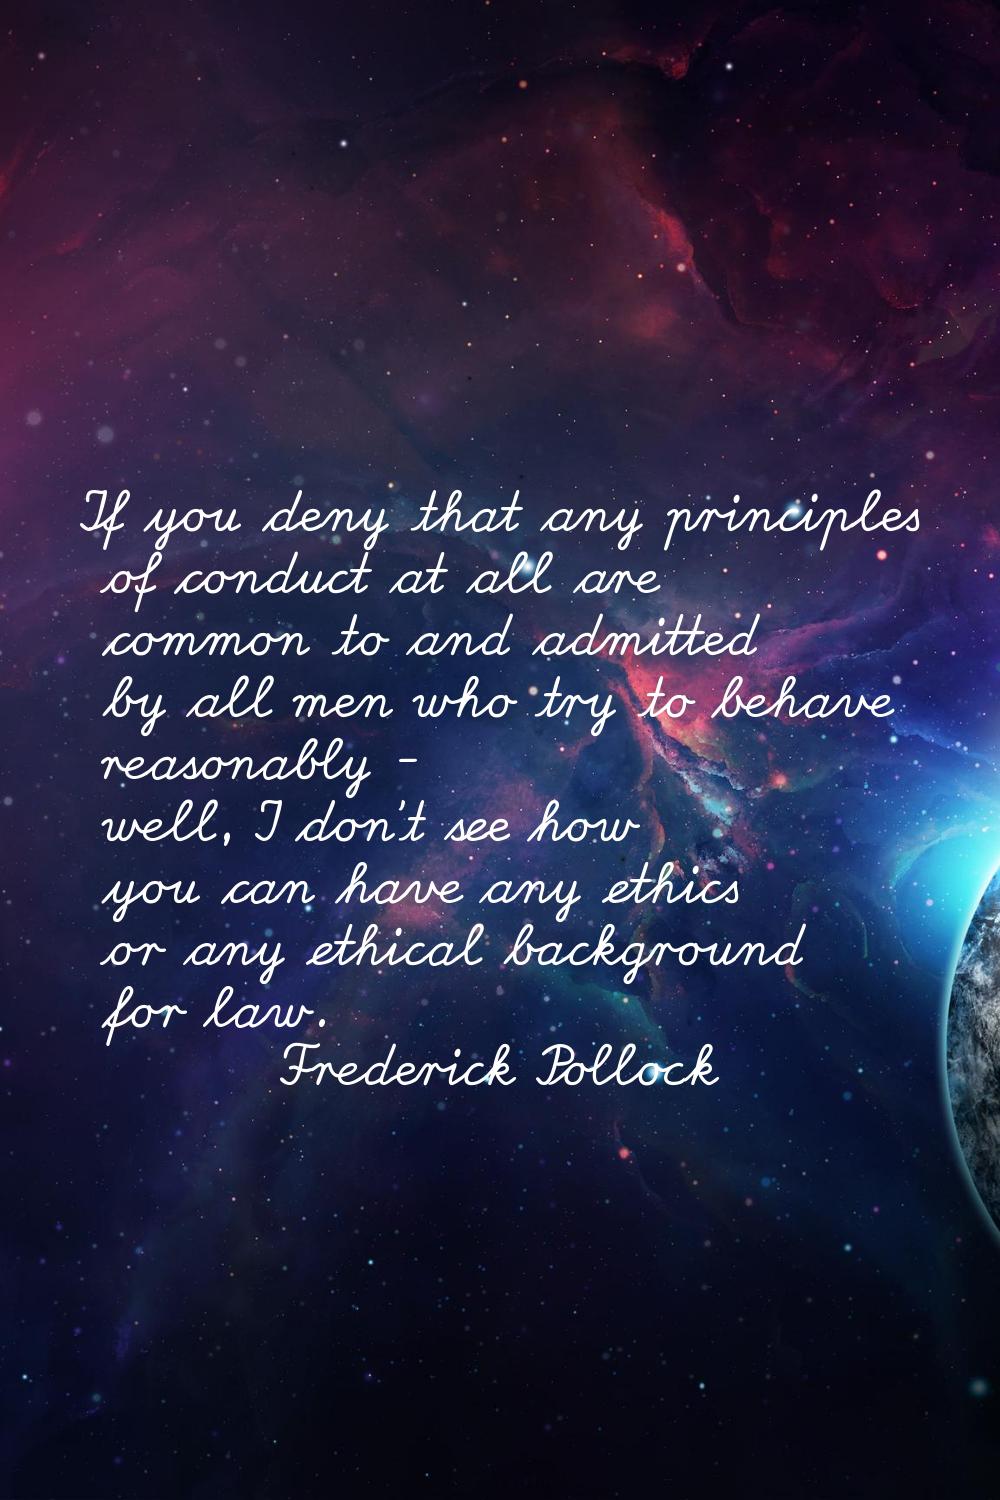 If you deny that any principles of conduct at all are common to and admitted by all men who try to 